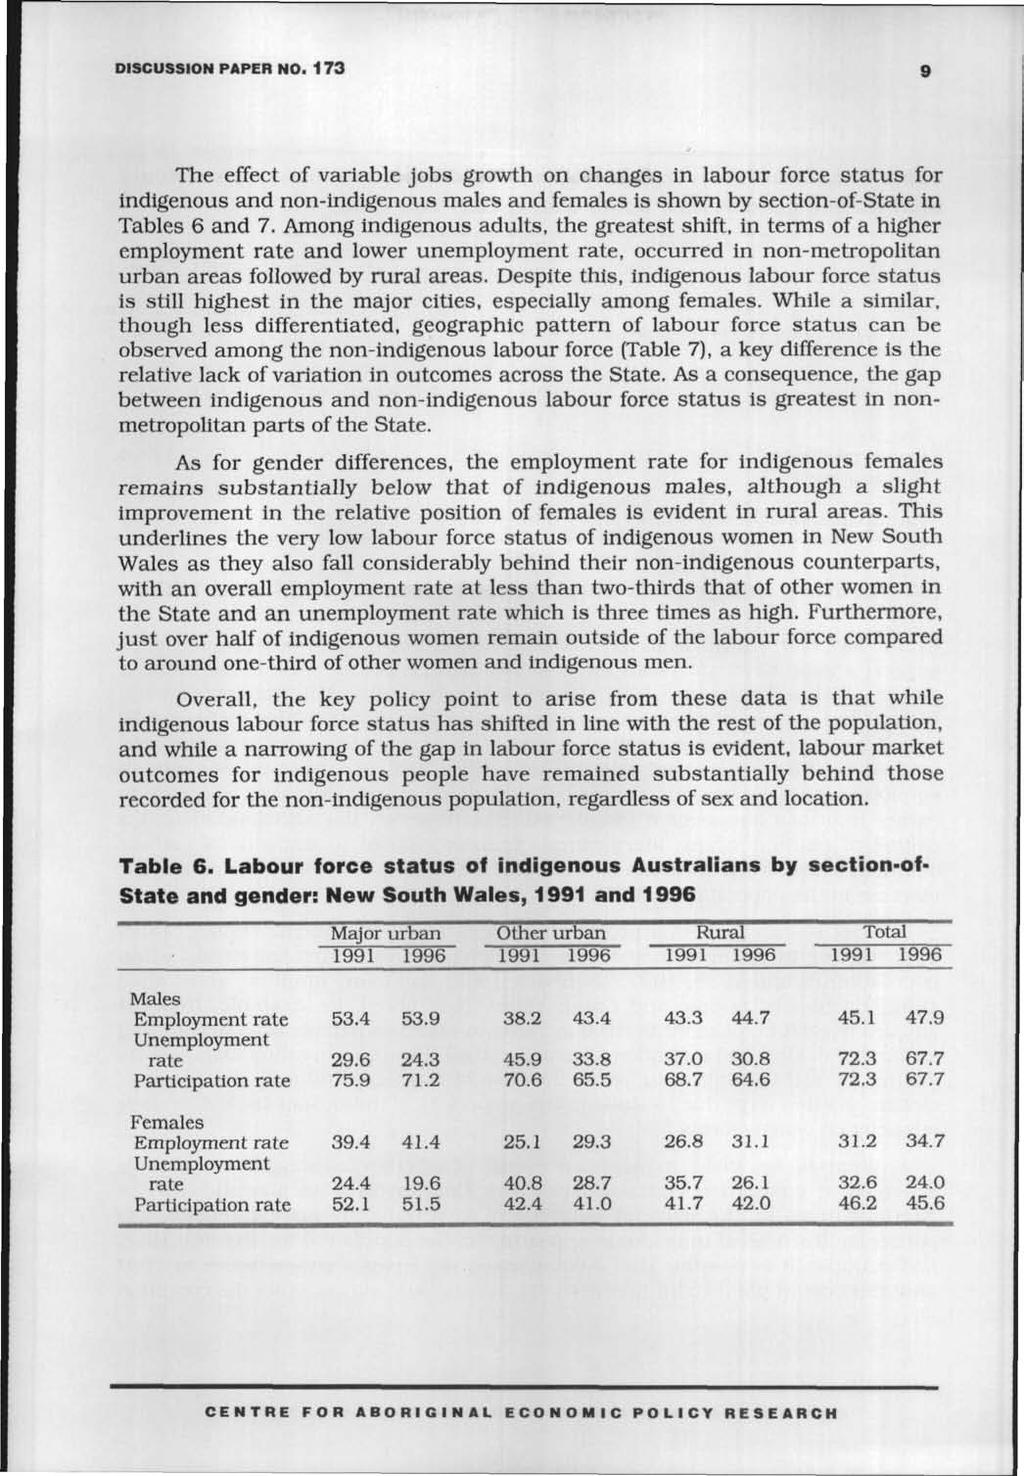 DISCUSSION PAPER NO. 1 73 The effect of variable jobs growth on changes in labour force status for indigenous and non-indigenous males and females is shown by section-of-state in Tables 6 and 7.